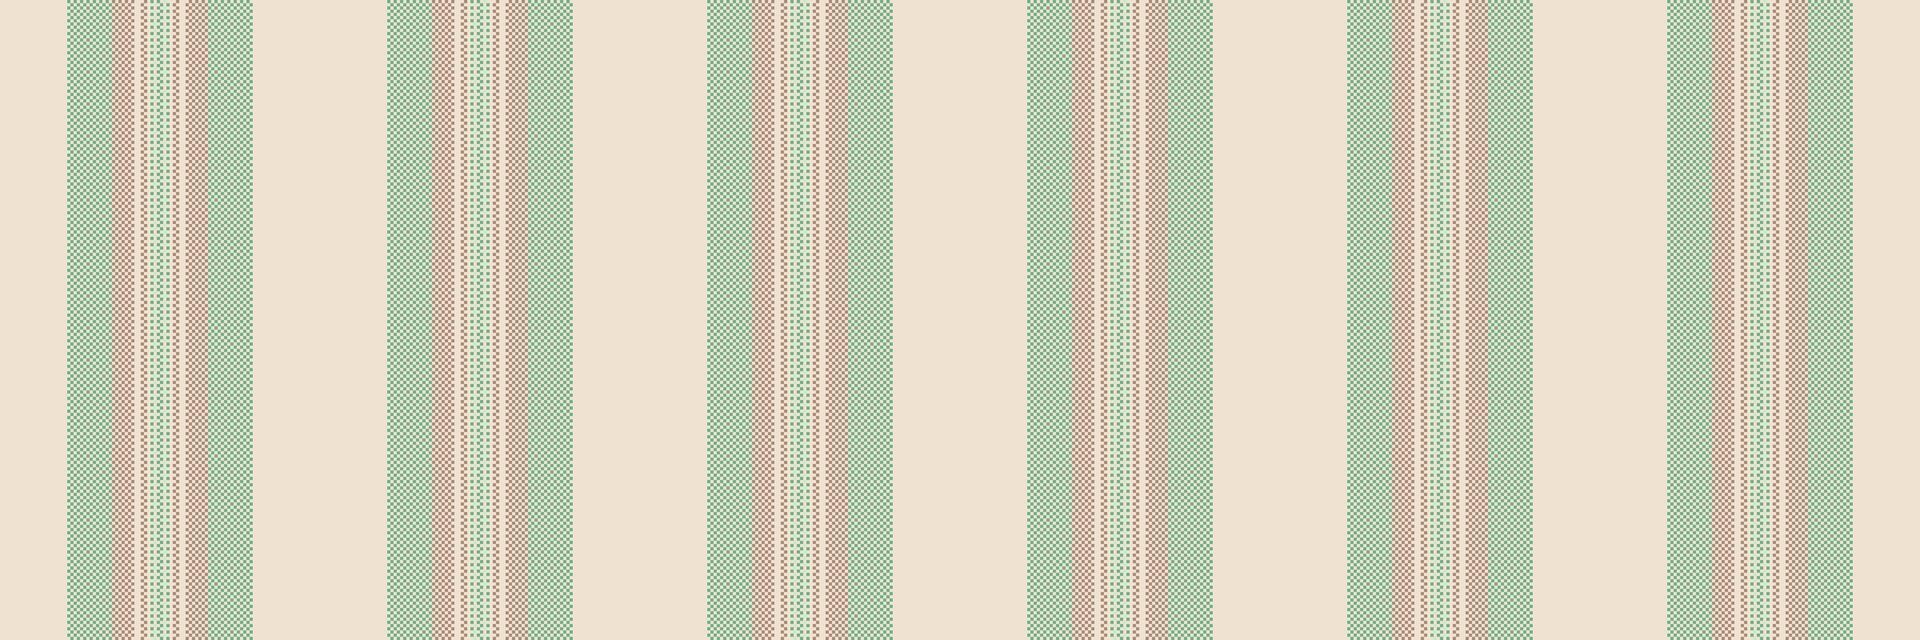 Primary fabric background lines, halloween seamless textile texture. Revival stripe vector vertical pattern in light and green colors.